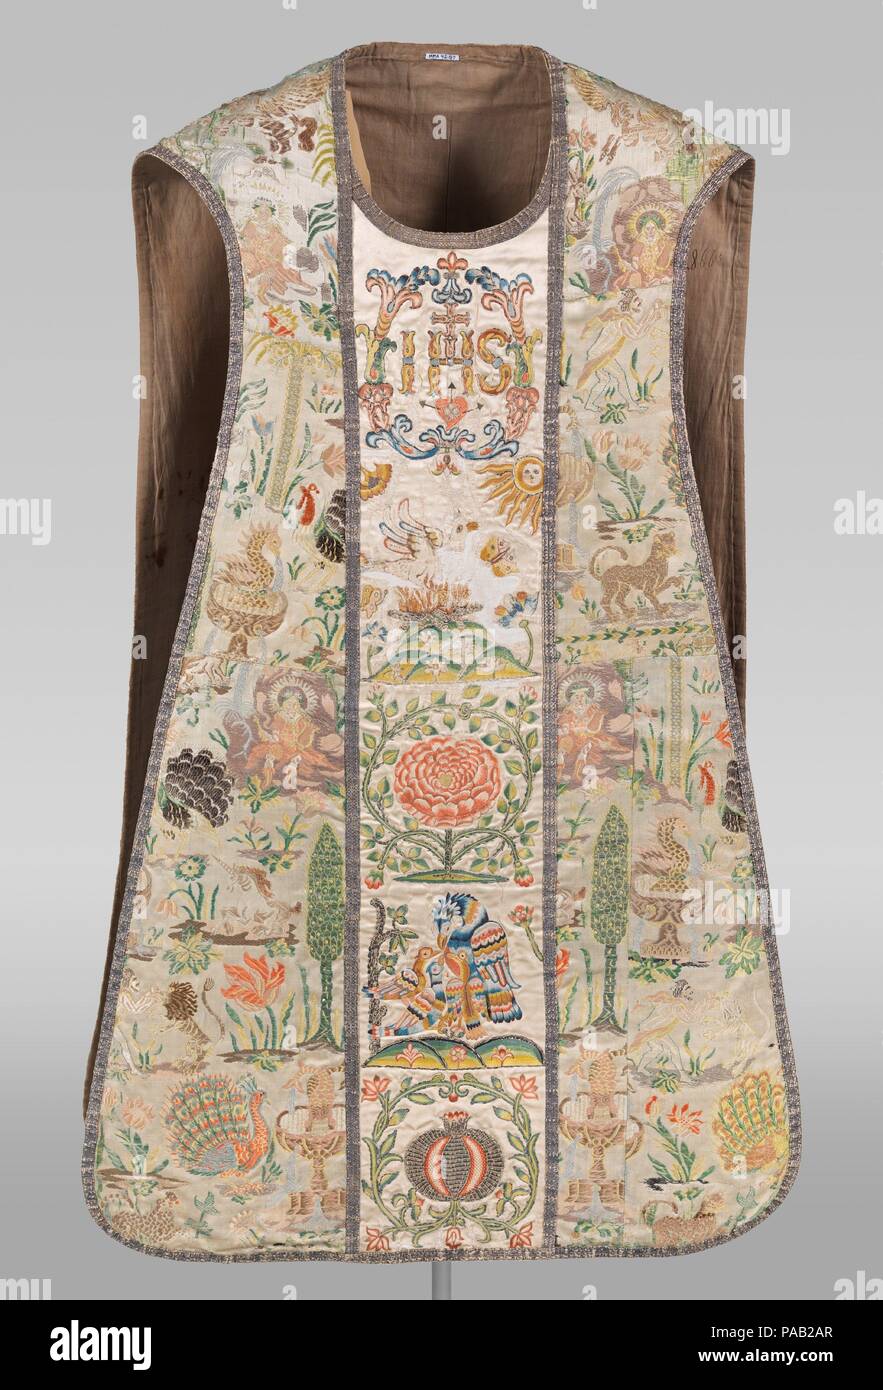 Chasuble. Culture: Portuguese. Dimensions: 48 × 29 in. (121.9 × 73.7 cm). Date: early 18th century.  This extravagant chasuble was likely constructed and used in Portugal. A variety of secular (fountains, peacocks, leopards, and turkeys) and mythical (unicorns, Hercules fighting a lion) images are scattered throughout the brocaded side panels, in contrast with the center panels, which are embroidered with traditional Christian motifs.  The materials may have been sourced in Asia and Europe. The woven body fabric is Portuguese while the white satin ground of the center panels is embroidered wit Stock Photo